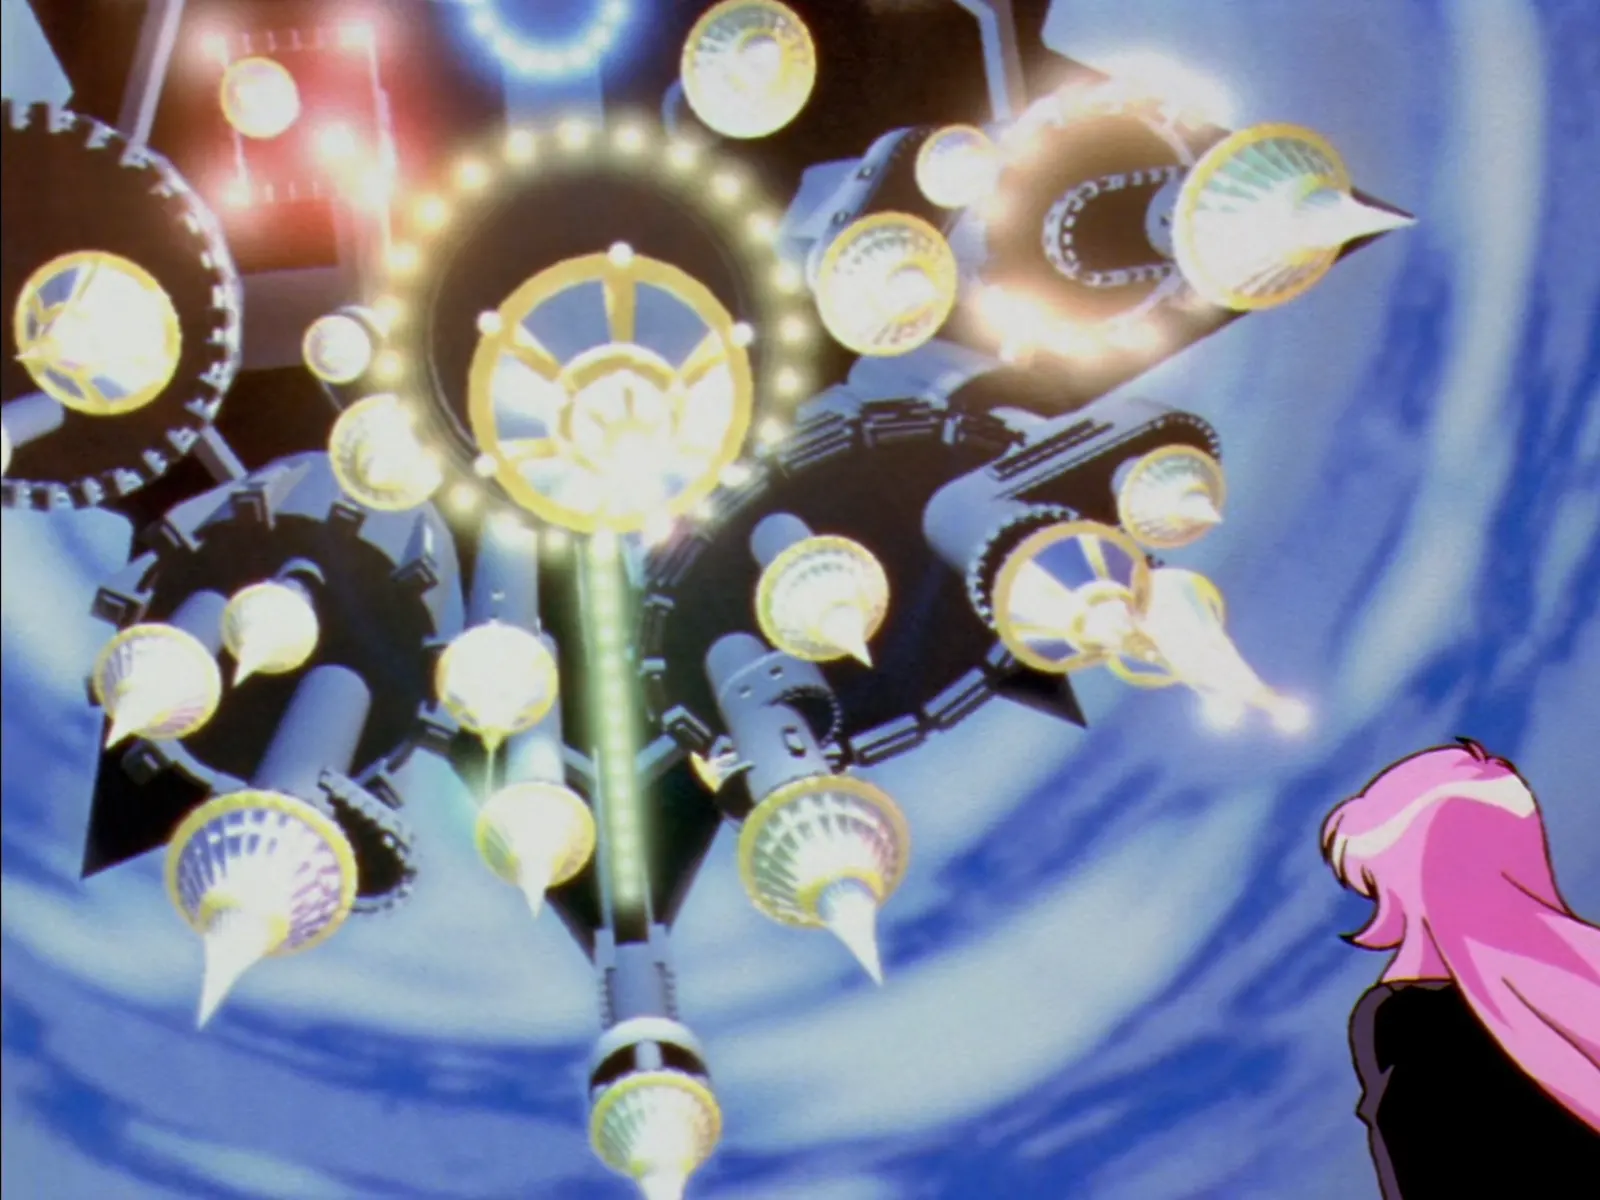 Weird CGI inverted rotating castle. Normal for a Tuesday in Utena’s schedule.